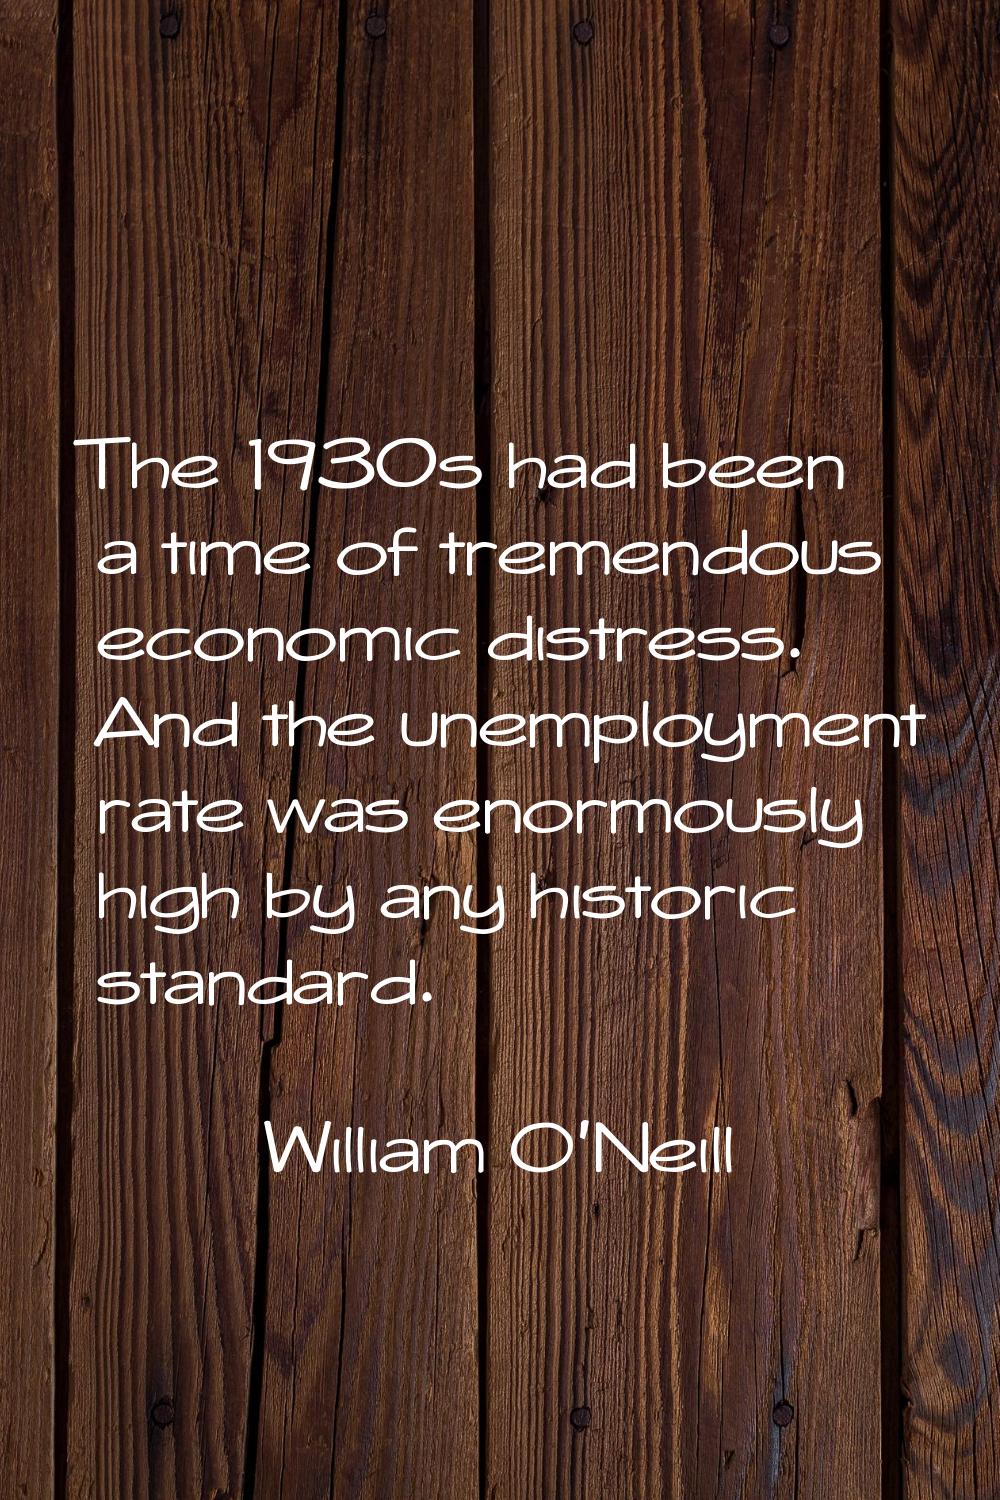 The 1930s had been a time of tremendous economic distress. And the unemployment rate was enormously